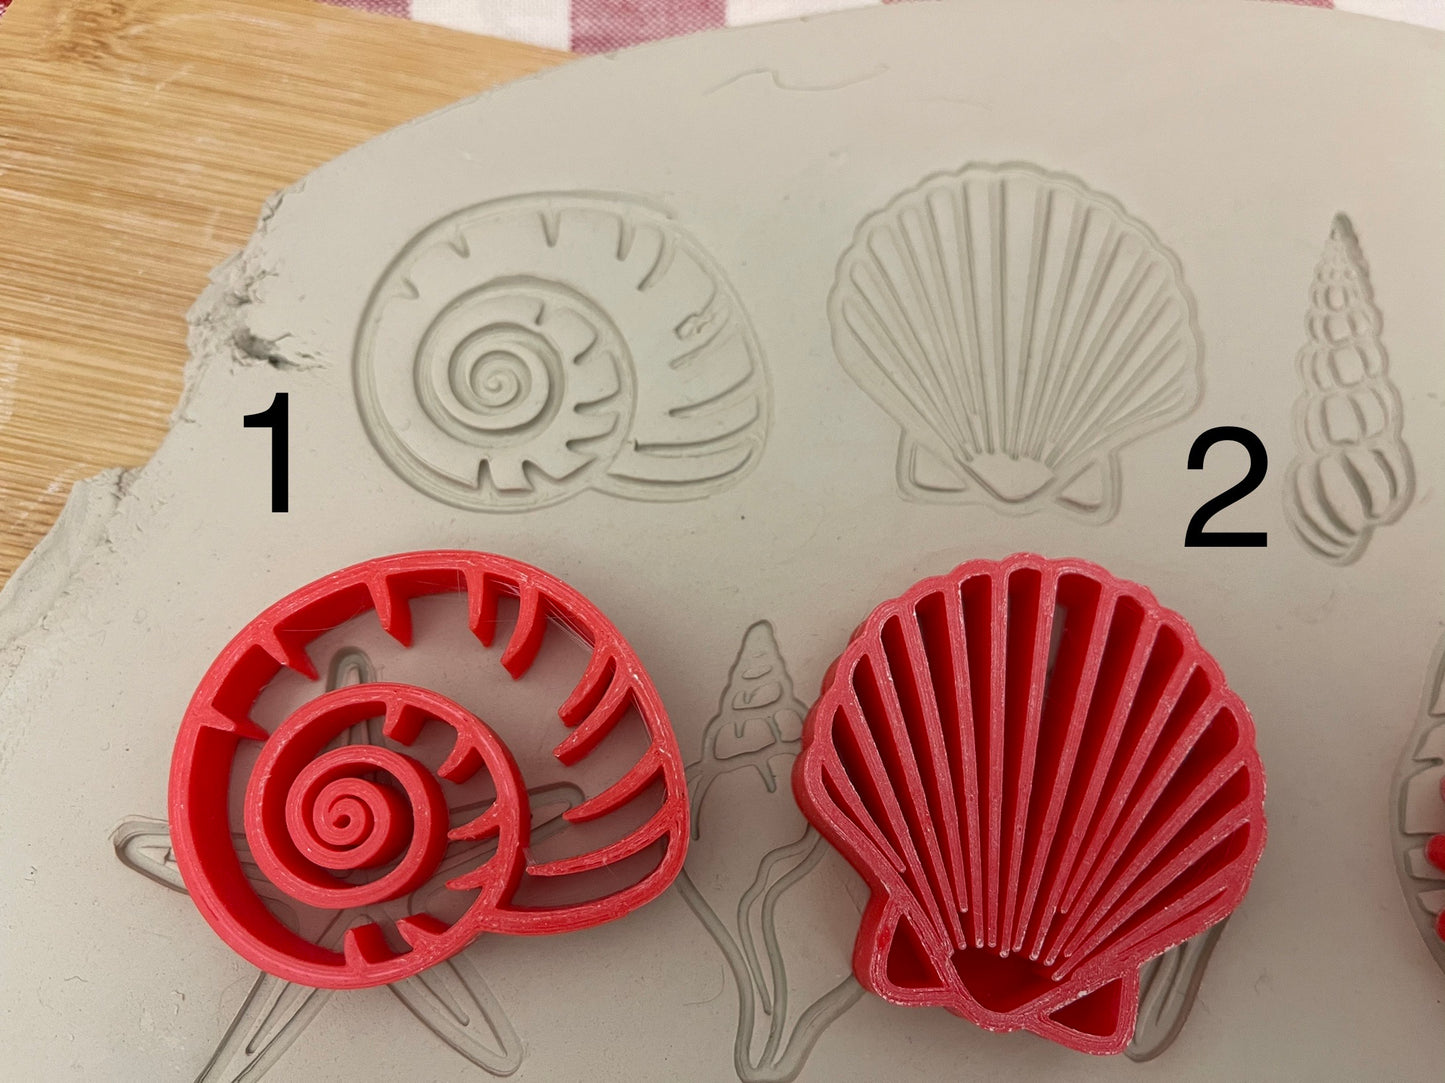 Lot of Seashell stamps - plastic 3D printed, multiple designs/sizes, Each or sets available